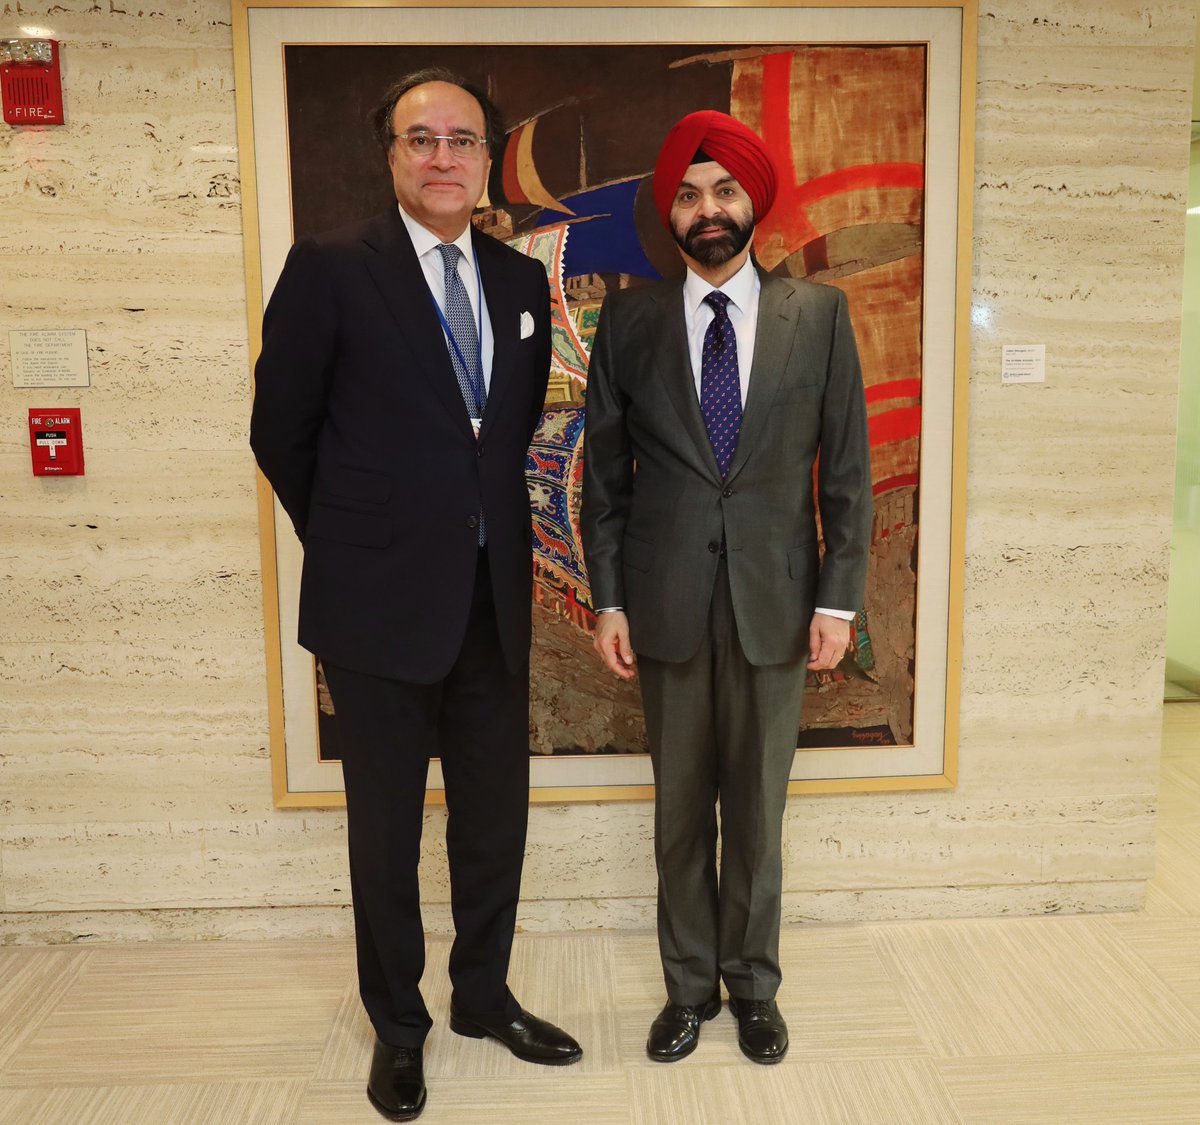 Finance Minister, Mr. Muhammad Aurangzeb, met with Mr. Ajay Banga, President World Bank Group today. The minister highlighted Pakistan's progress under the 9-month SBA program and ongoing reforms in priority areas of taxation, energy and privatization. (1/2)